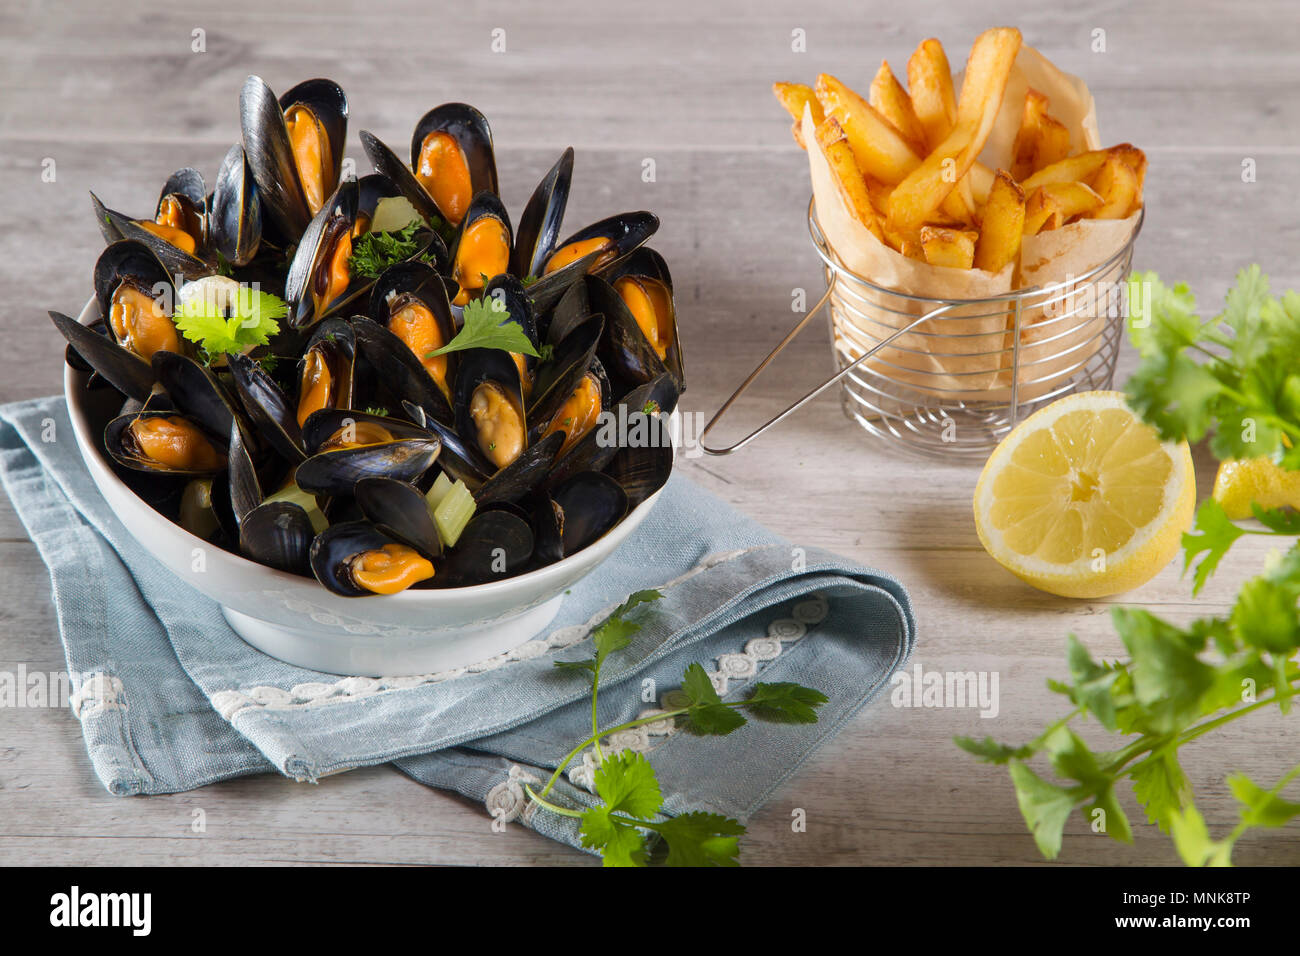 Mussels and French fries Stock Photo